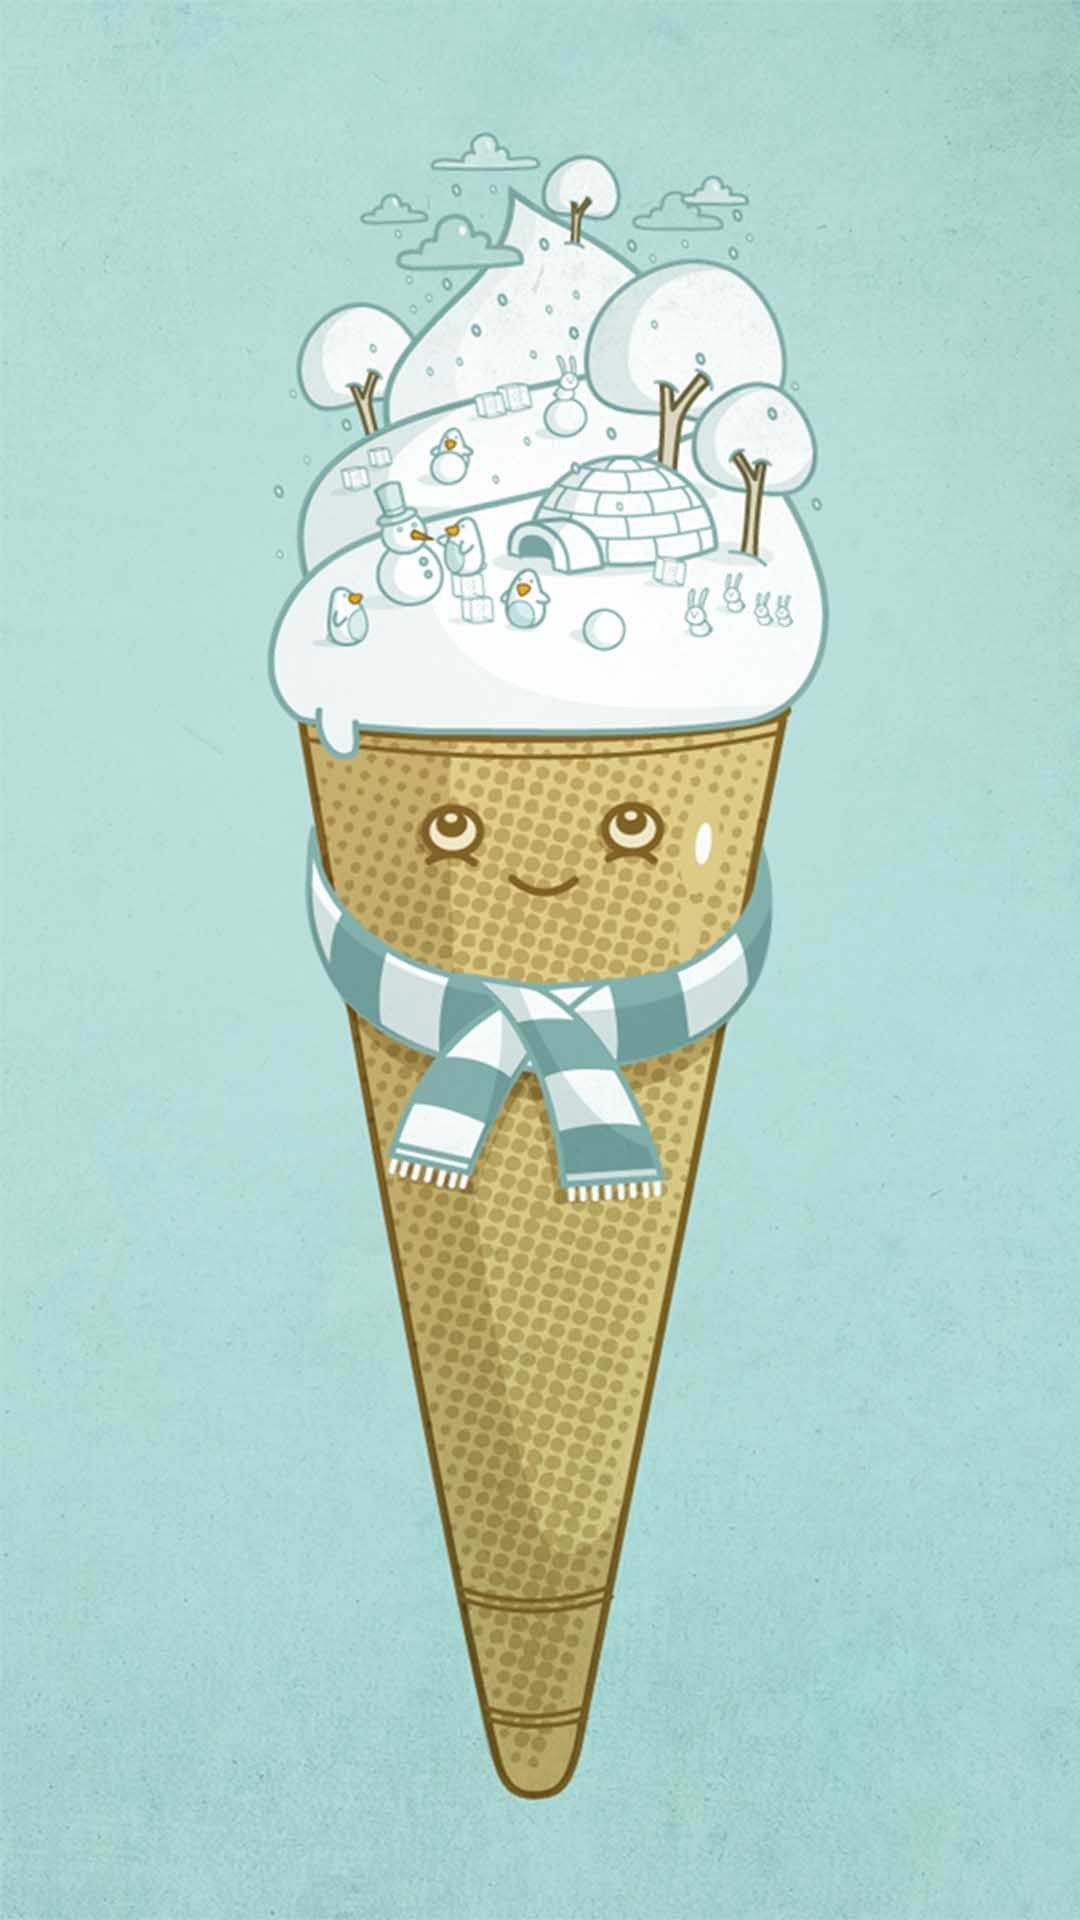 Tap image for more cute funny iPhone wallpaper! Ice cream